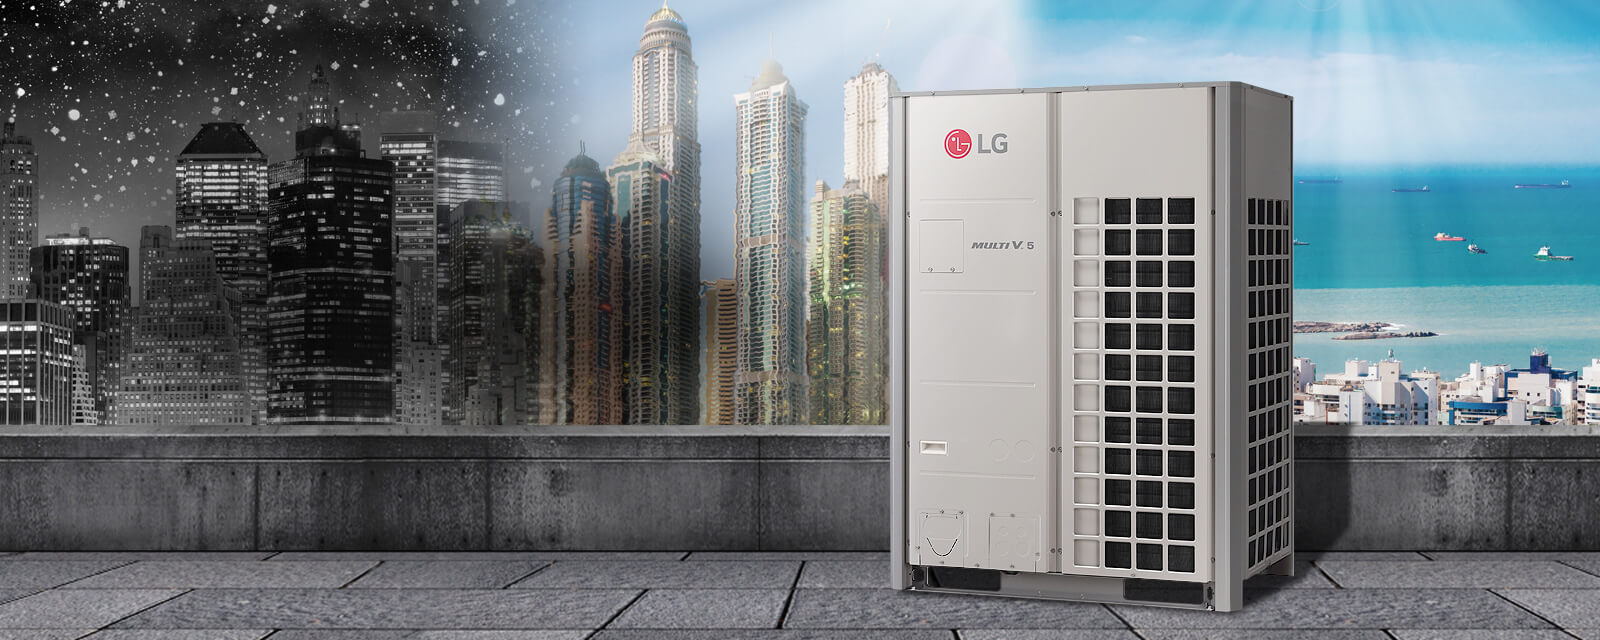 LG AC unit pictured in front of a background of varying city types